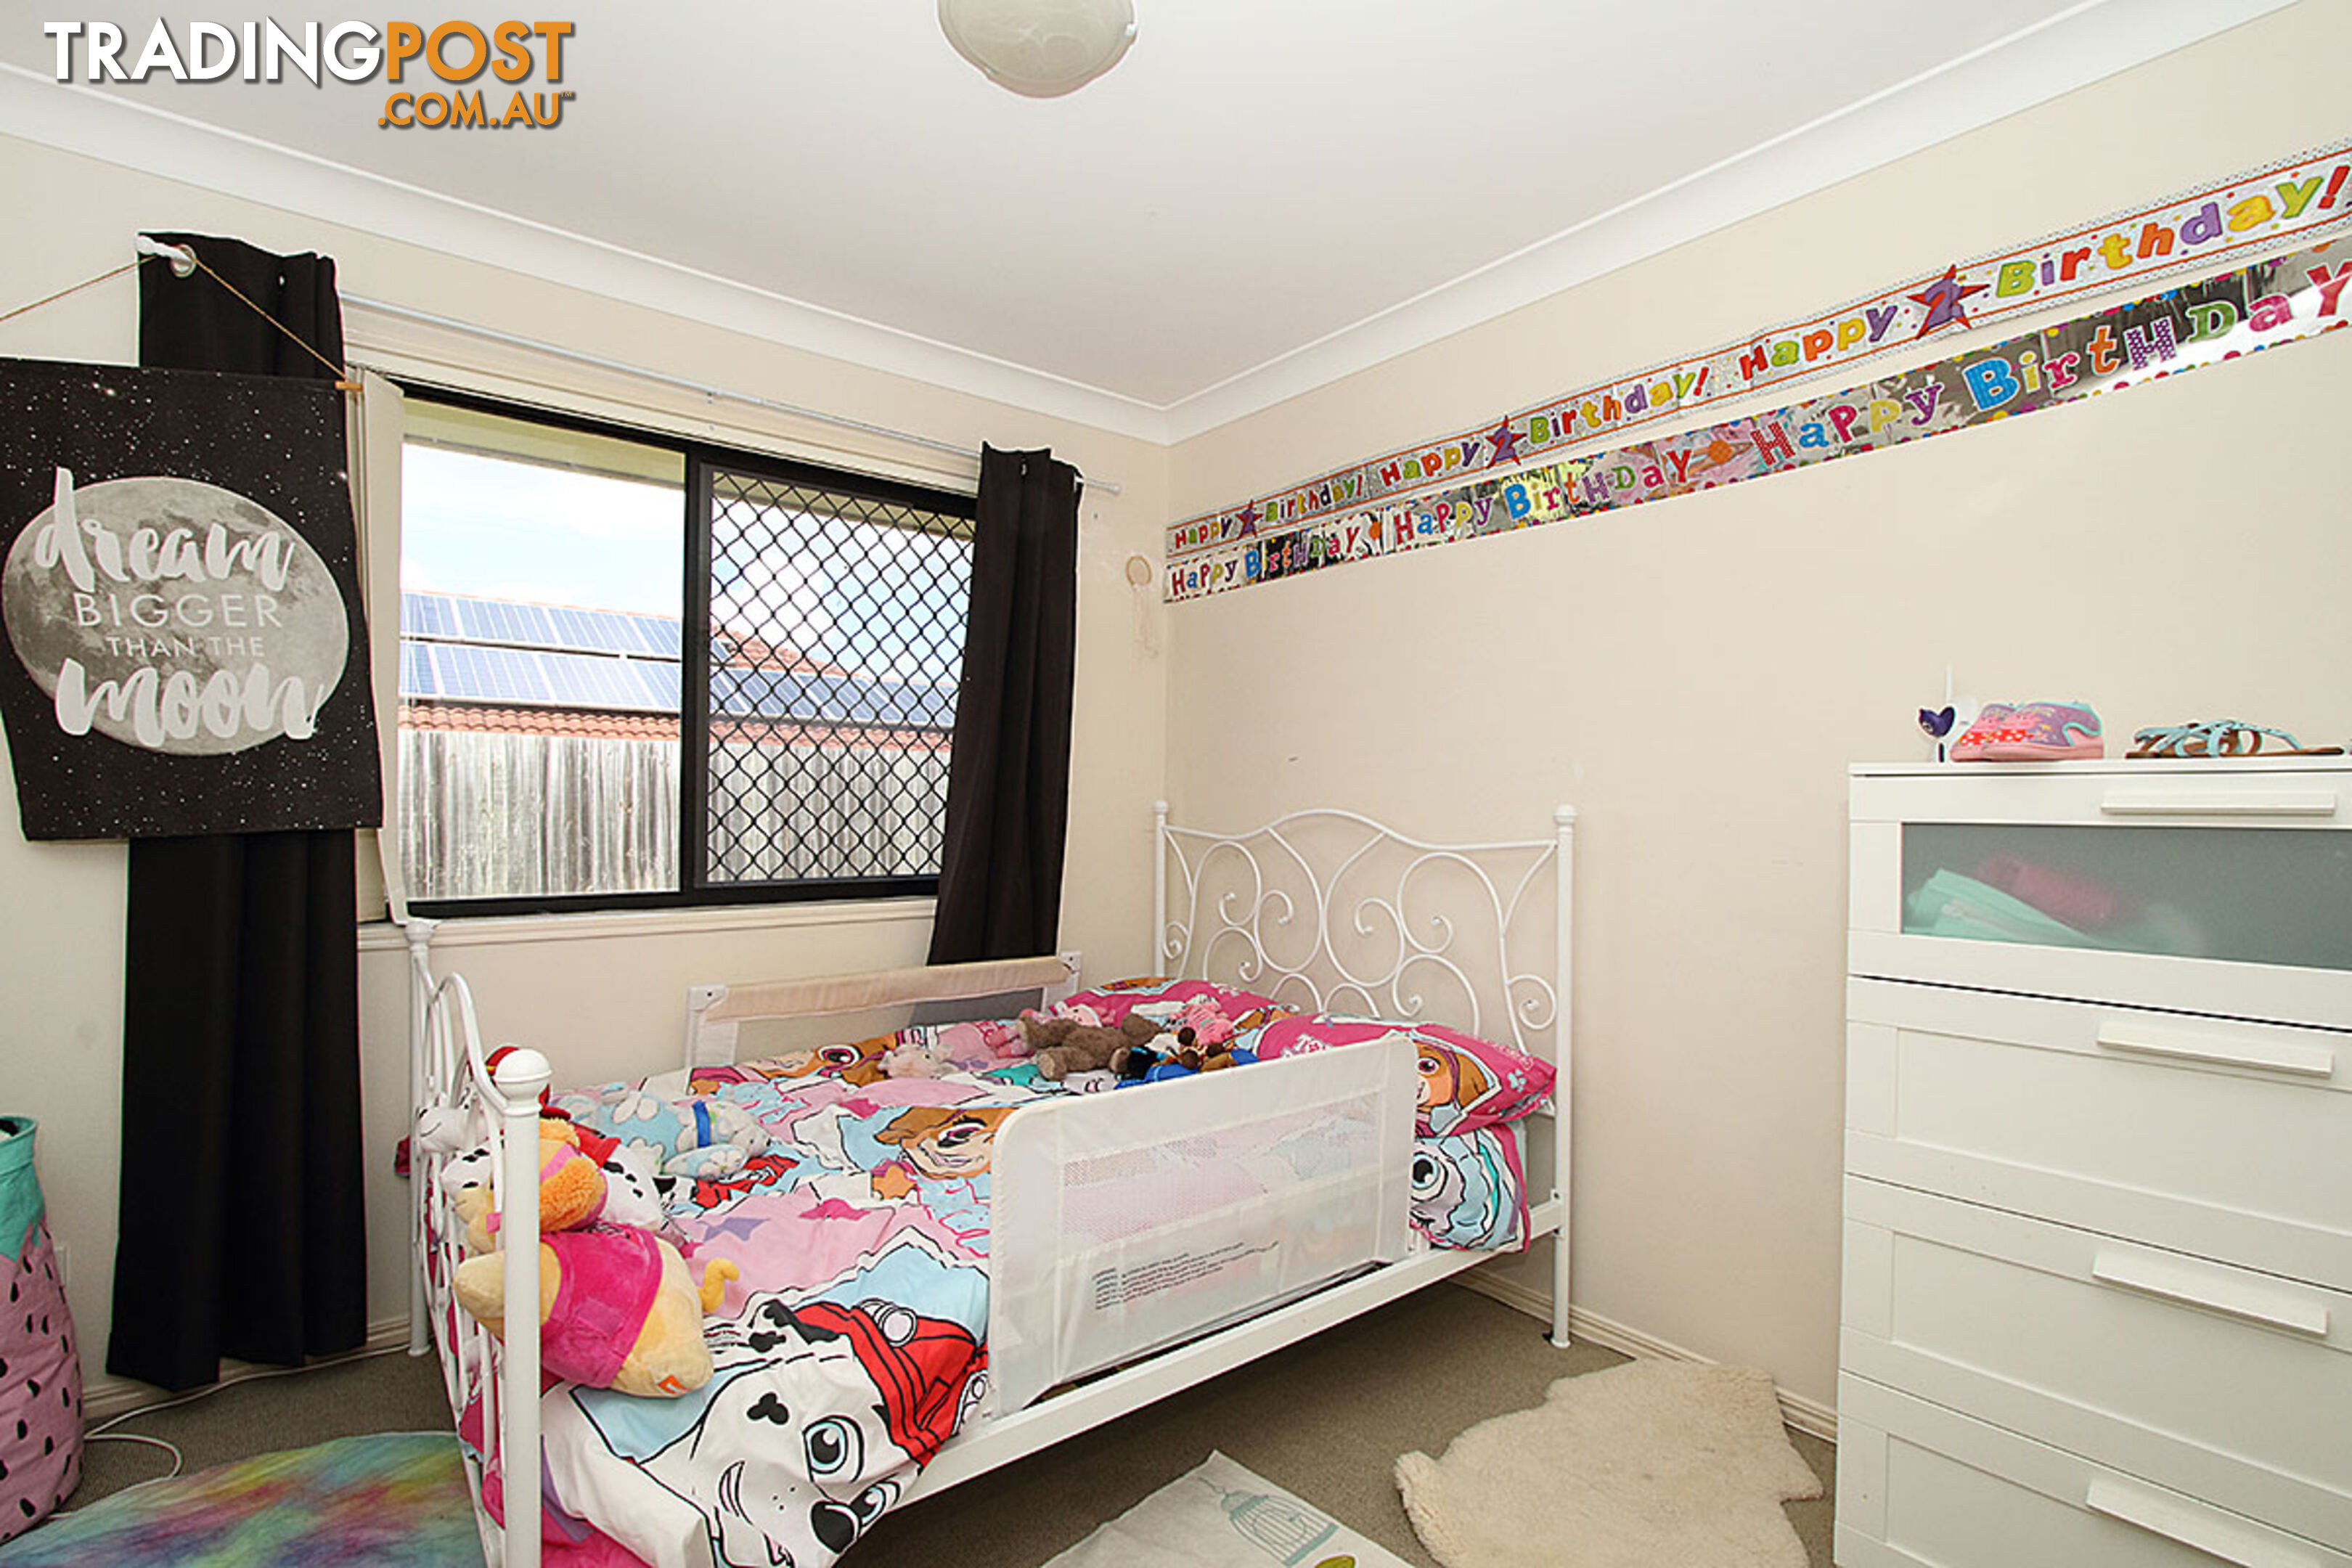 17 Elcock Ave CRESTMEAD QLD 4132